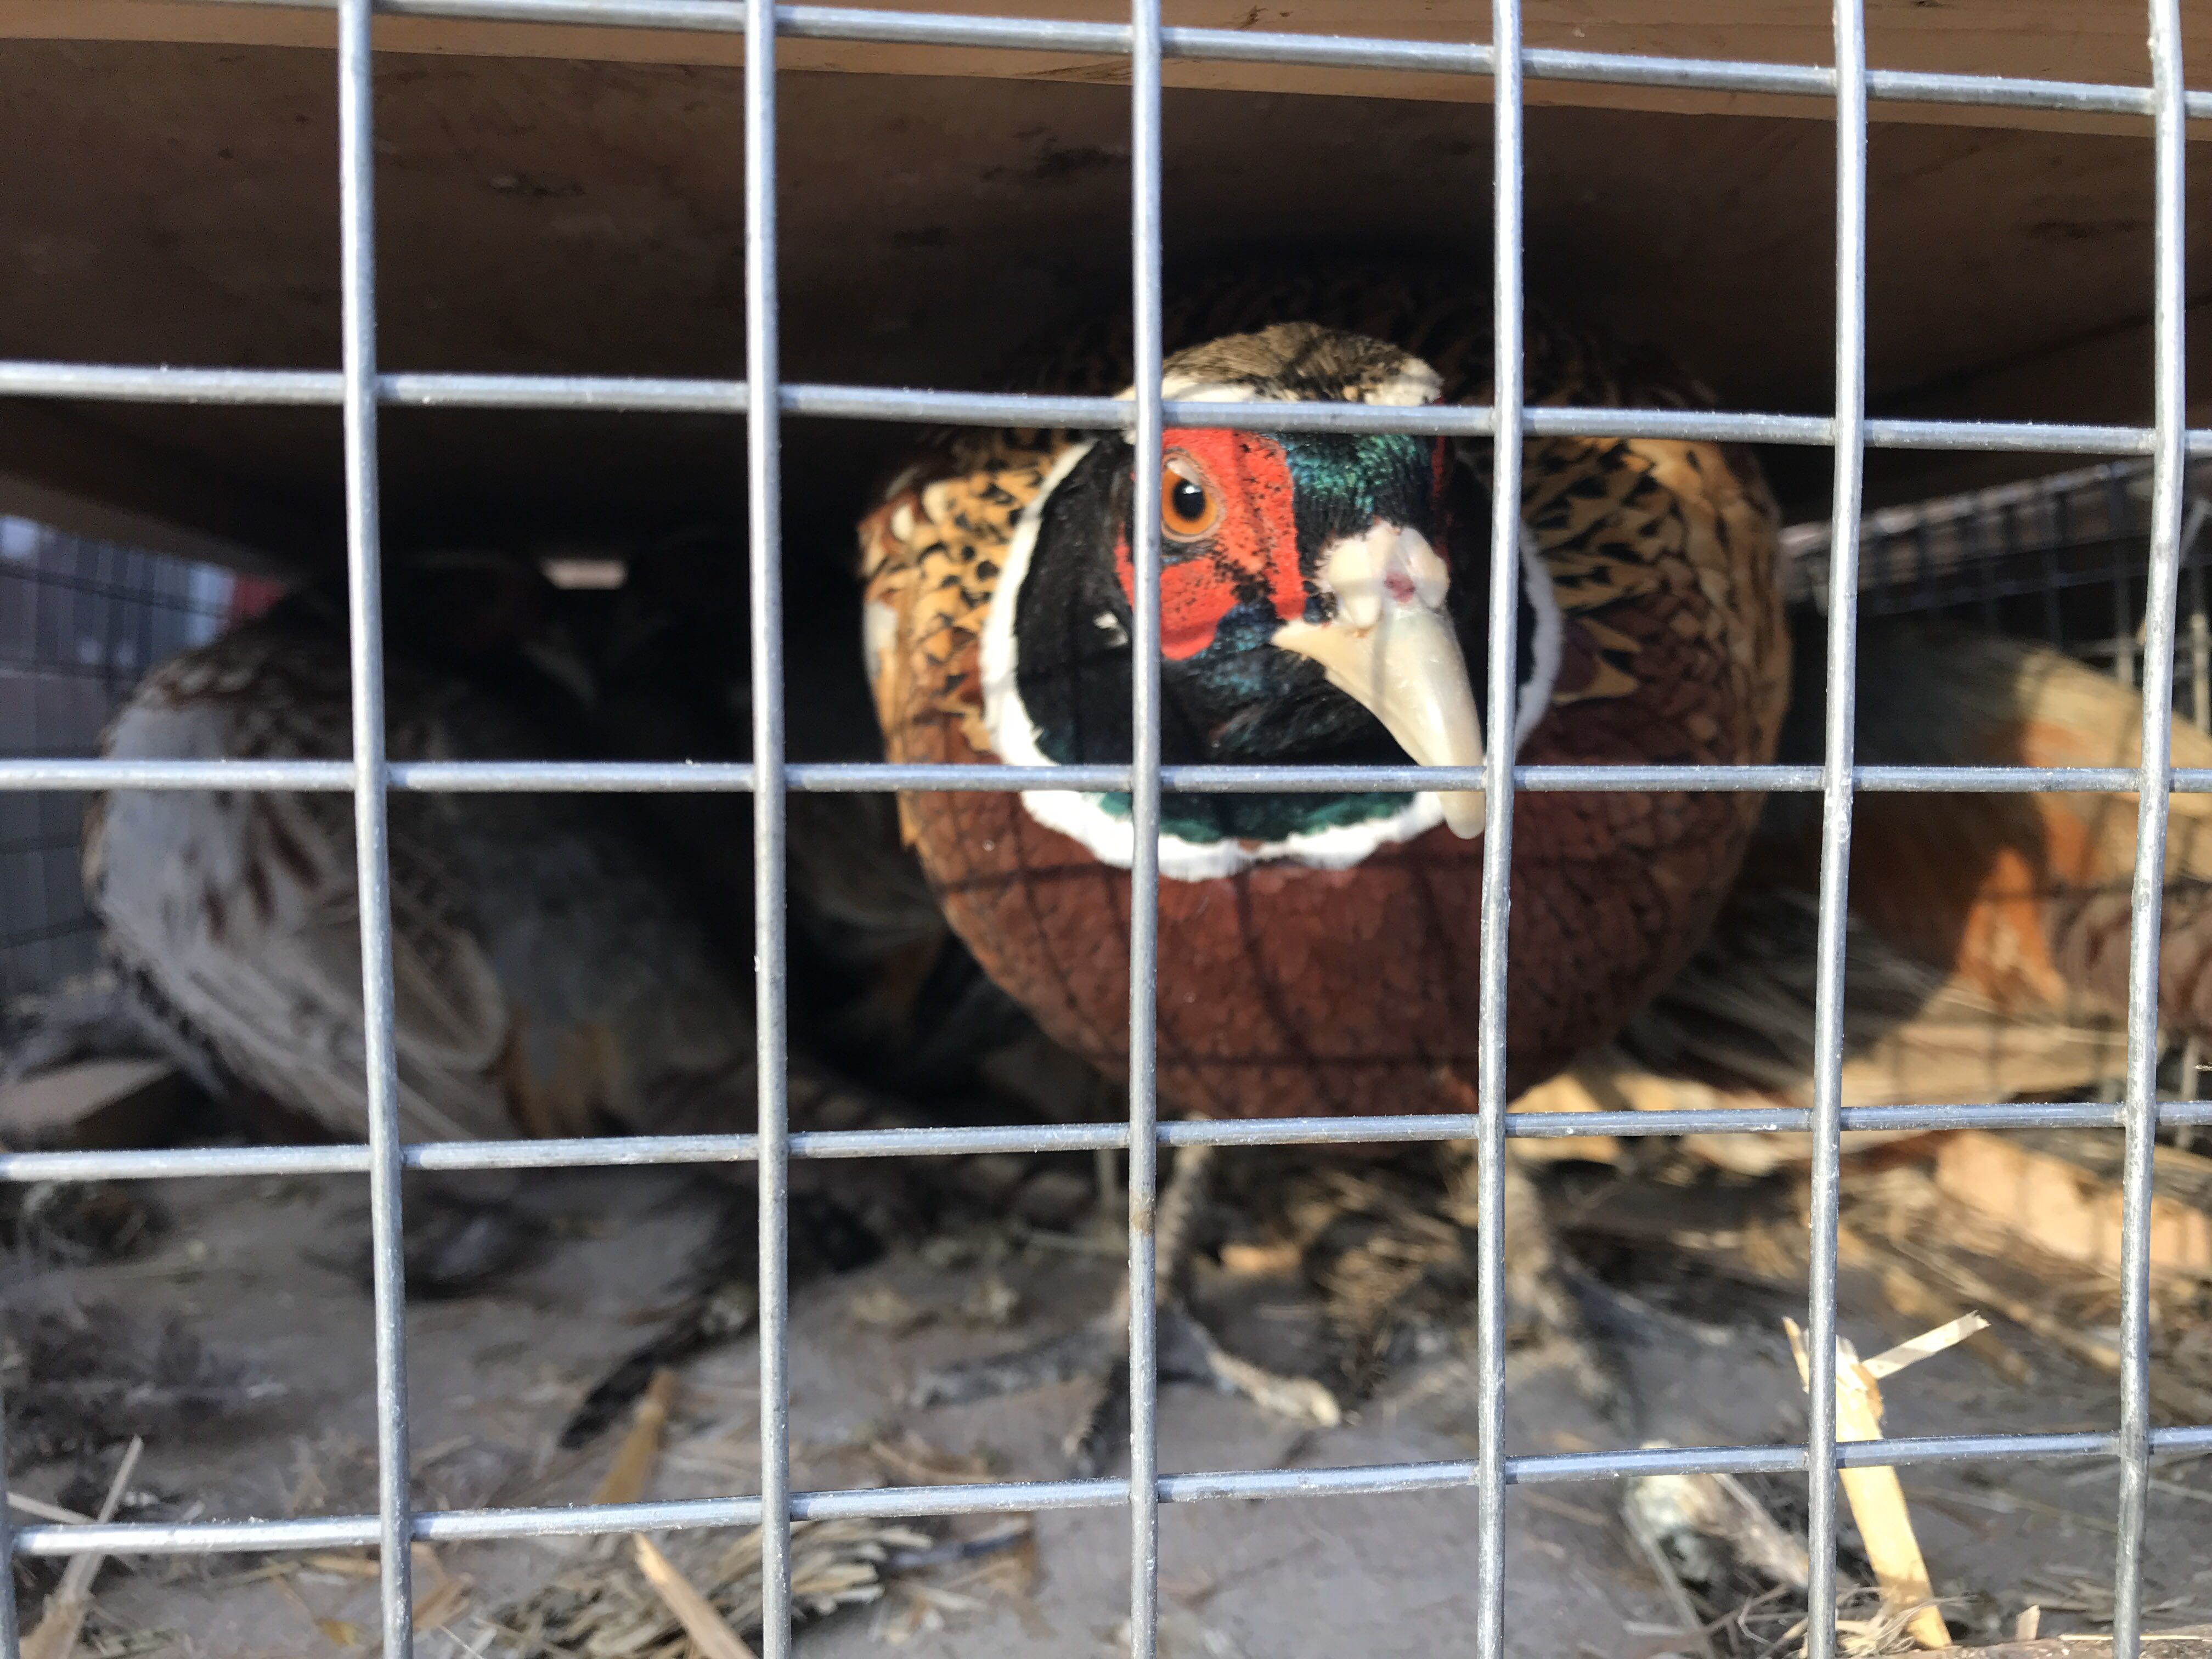 pheasant_in_box_before_release_oct_2019